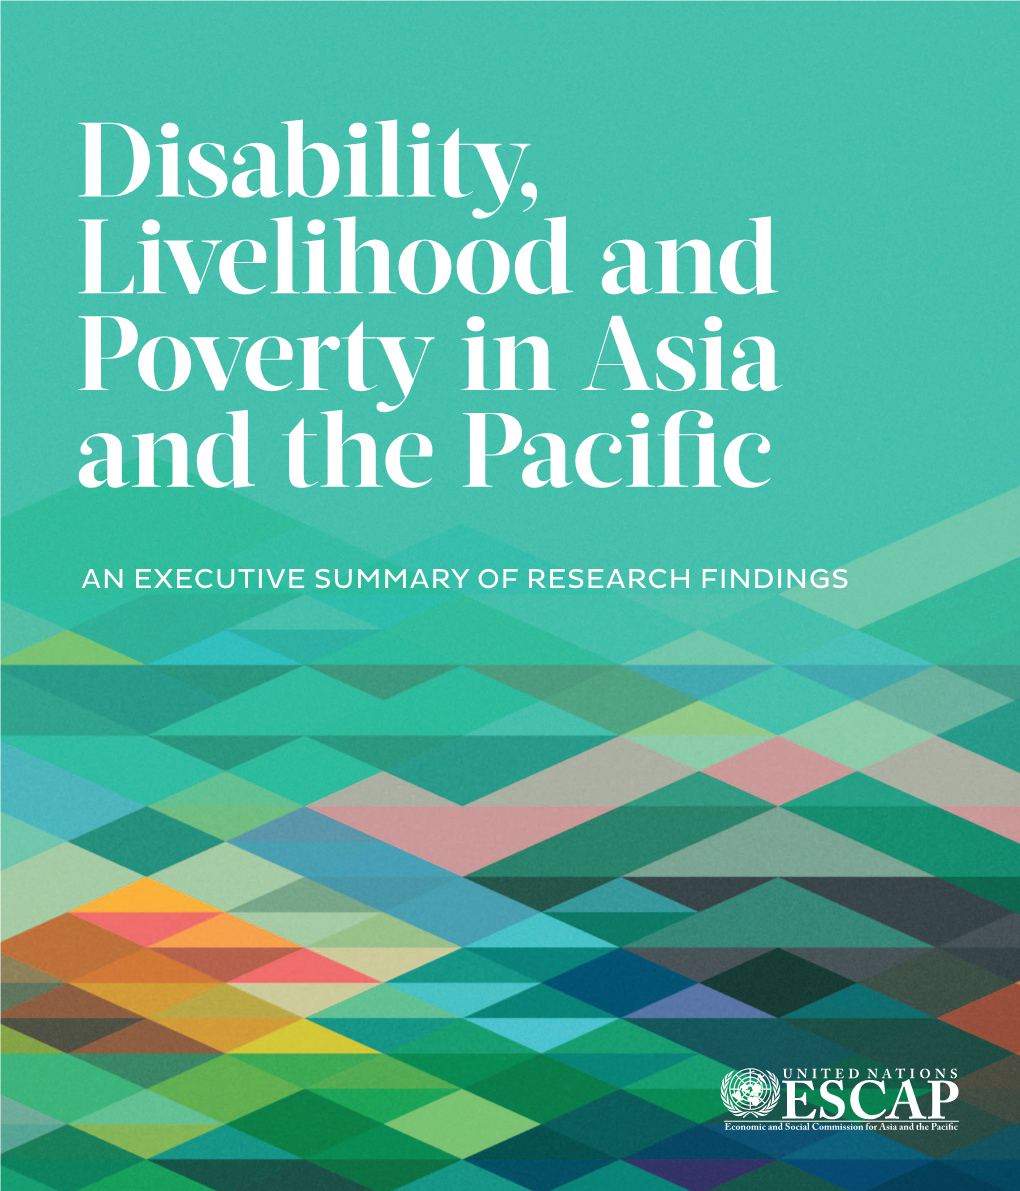 Disability, Livelihood and Poverty in Asia and the Pacific